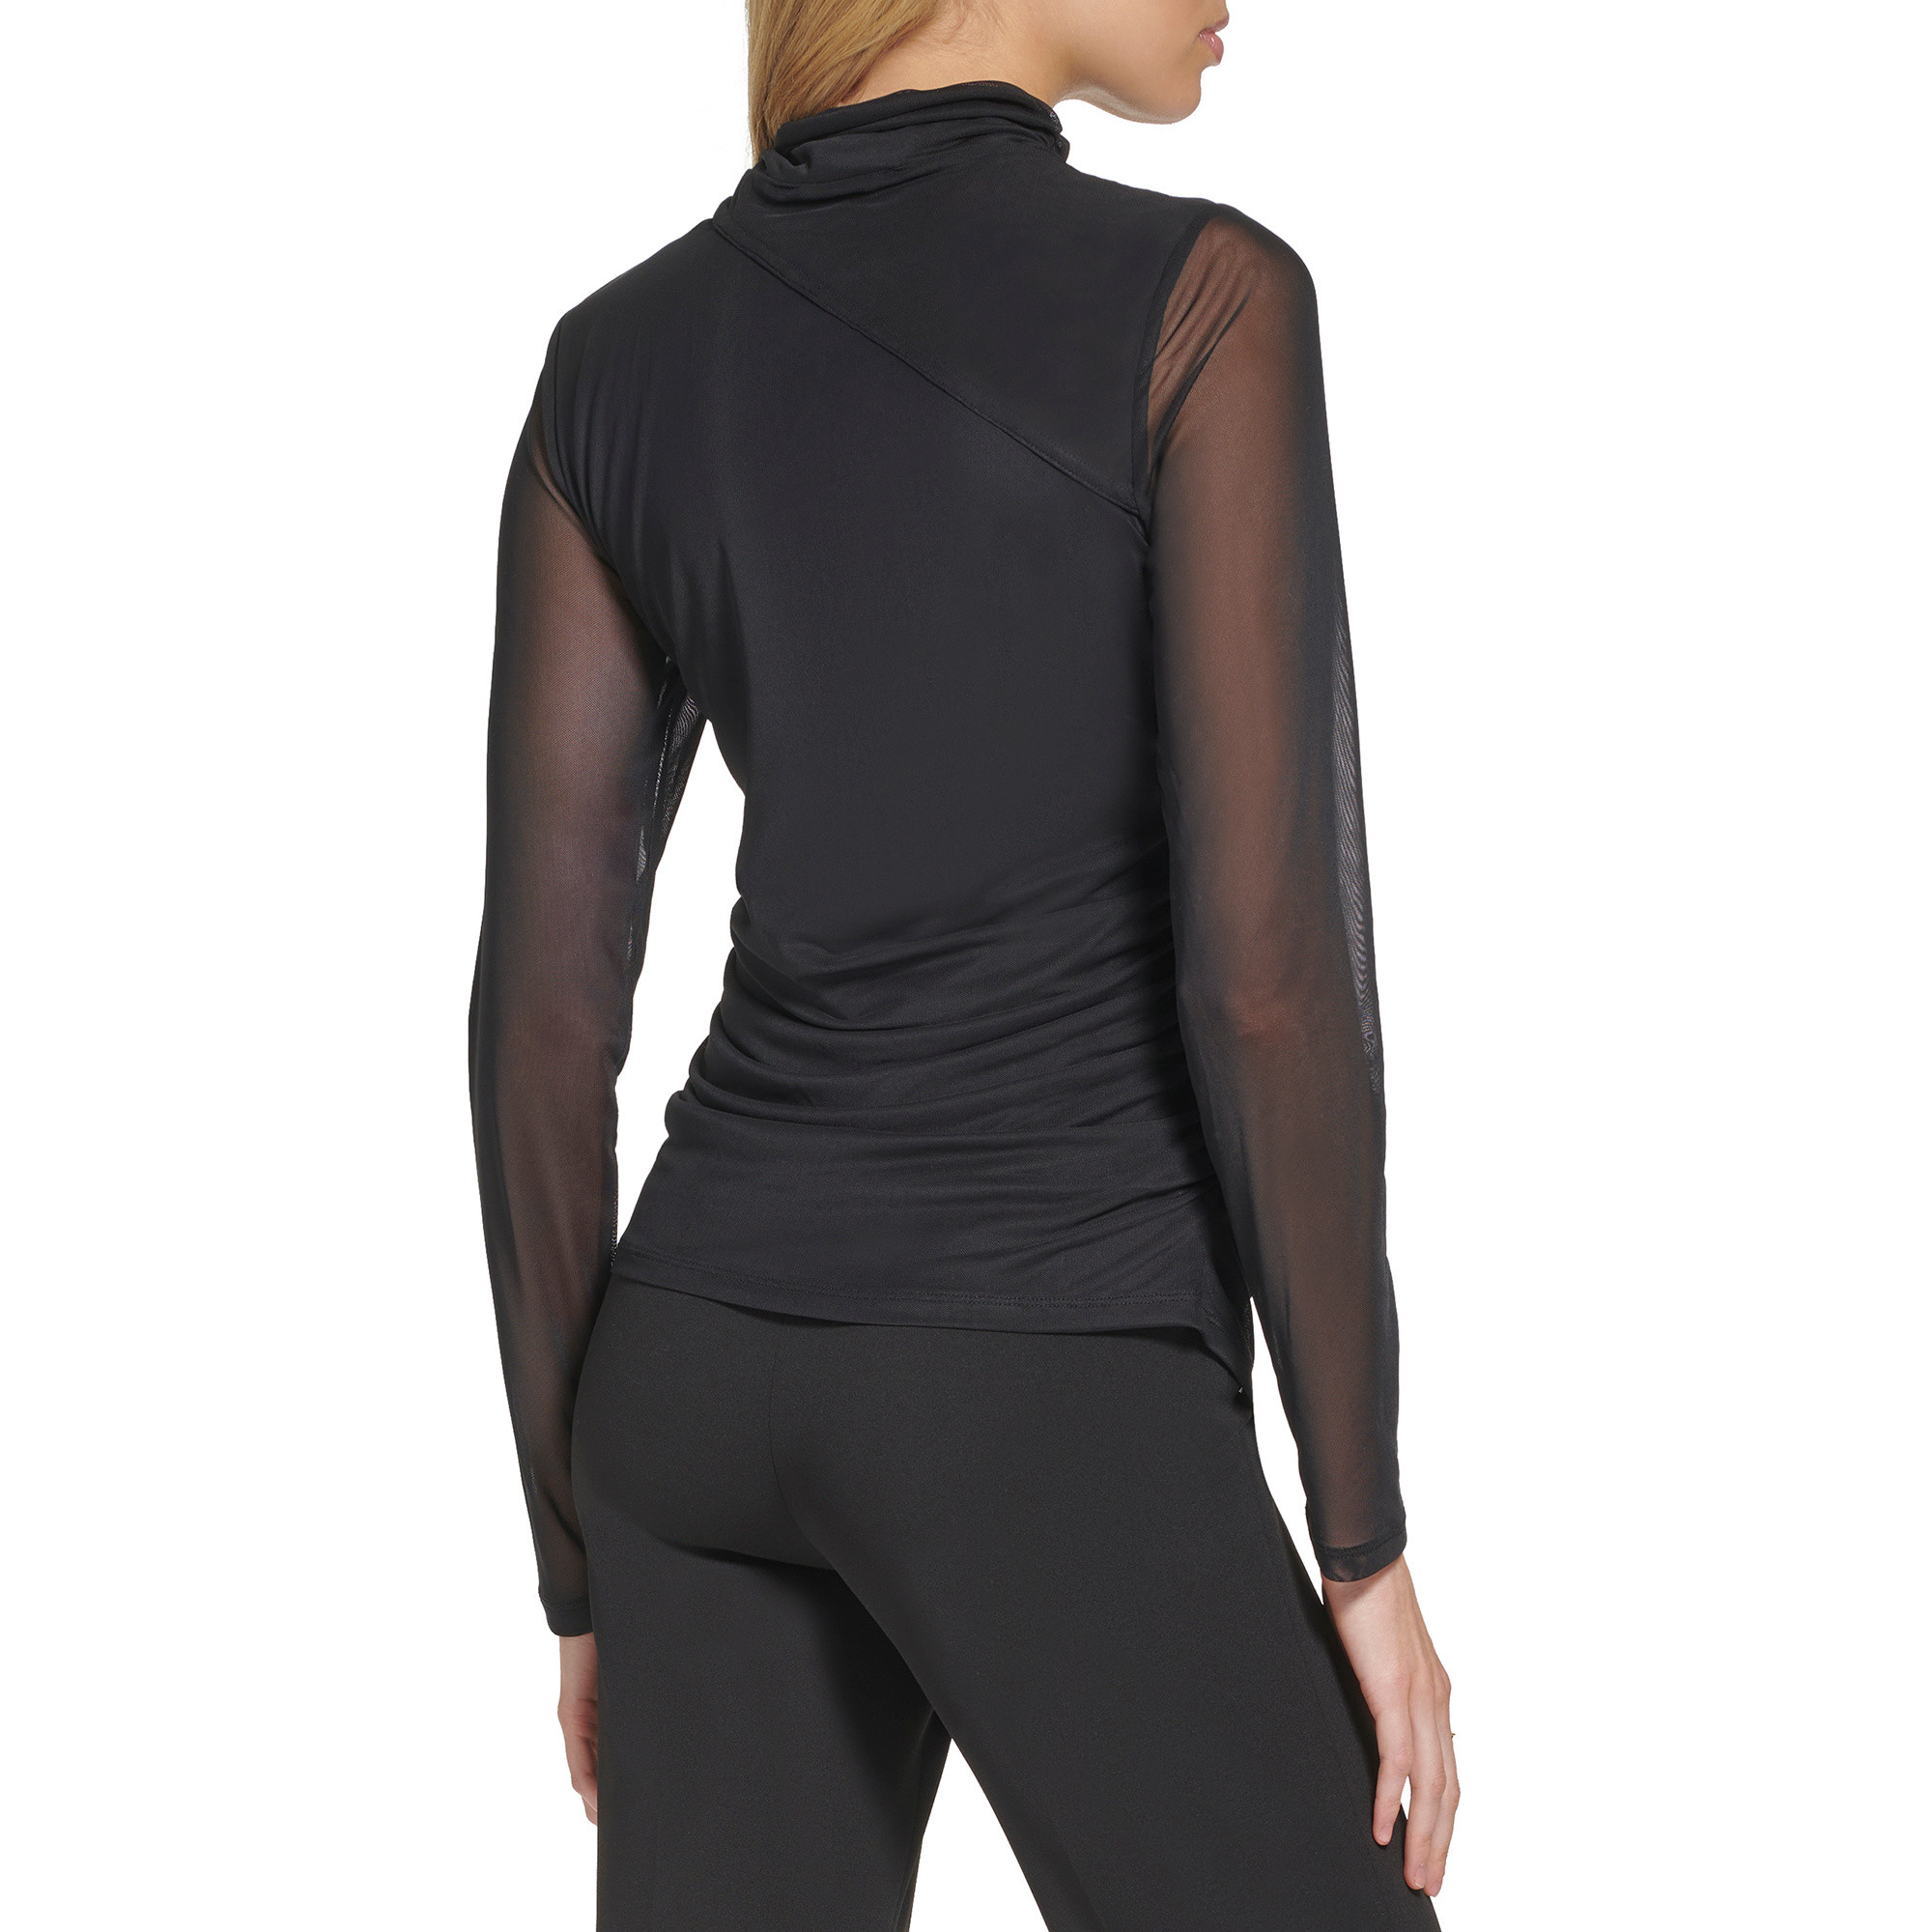 DKNY - Mesh sweater with cut out detail, Black, large image number 4